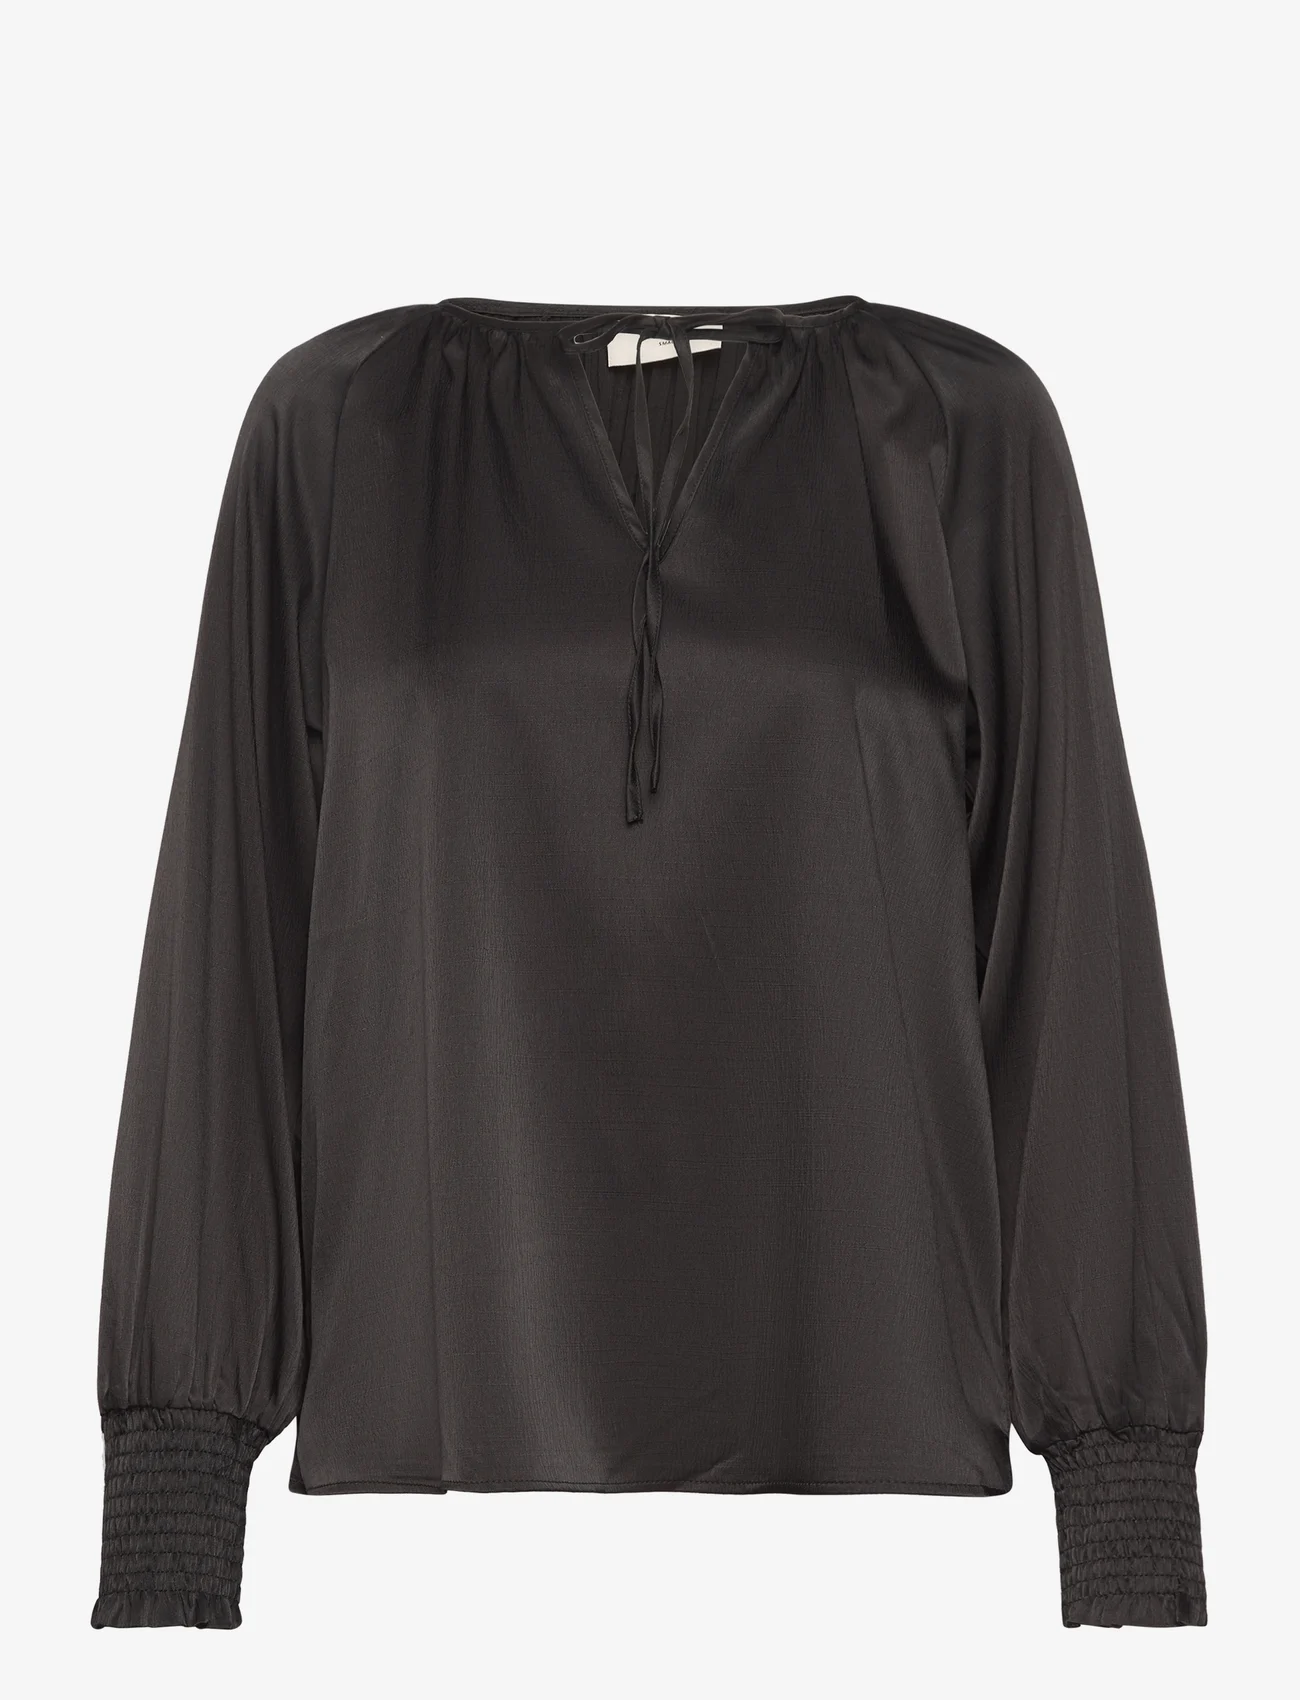 FREE/QUENT - FQBLISS-BLOUSE - long-sleeved blouses - black - 0